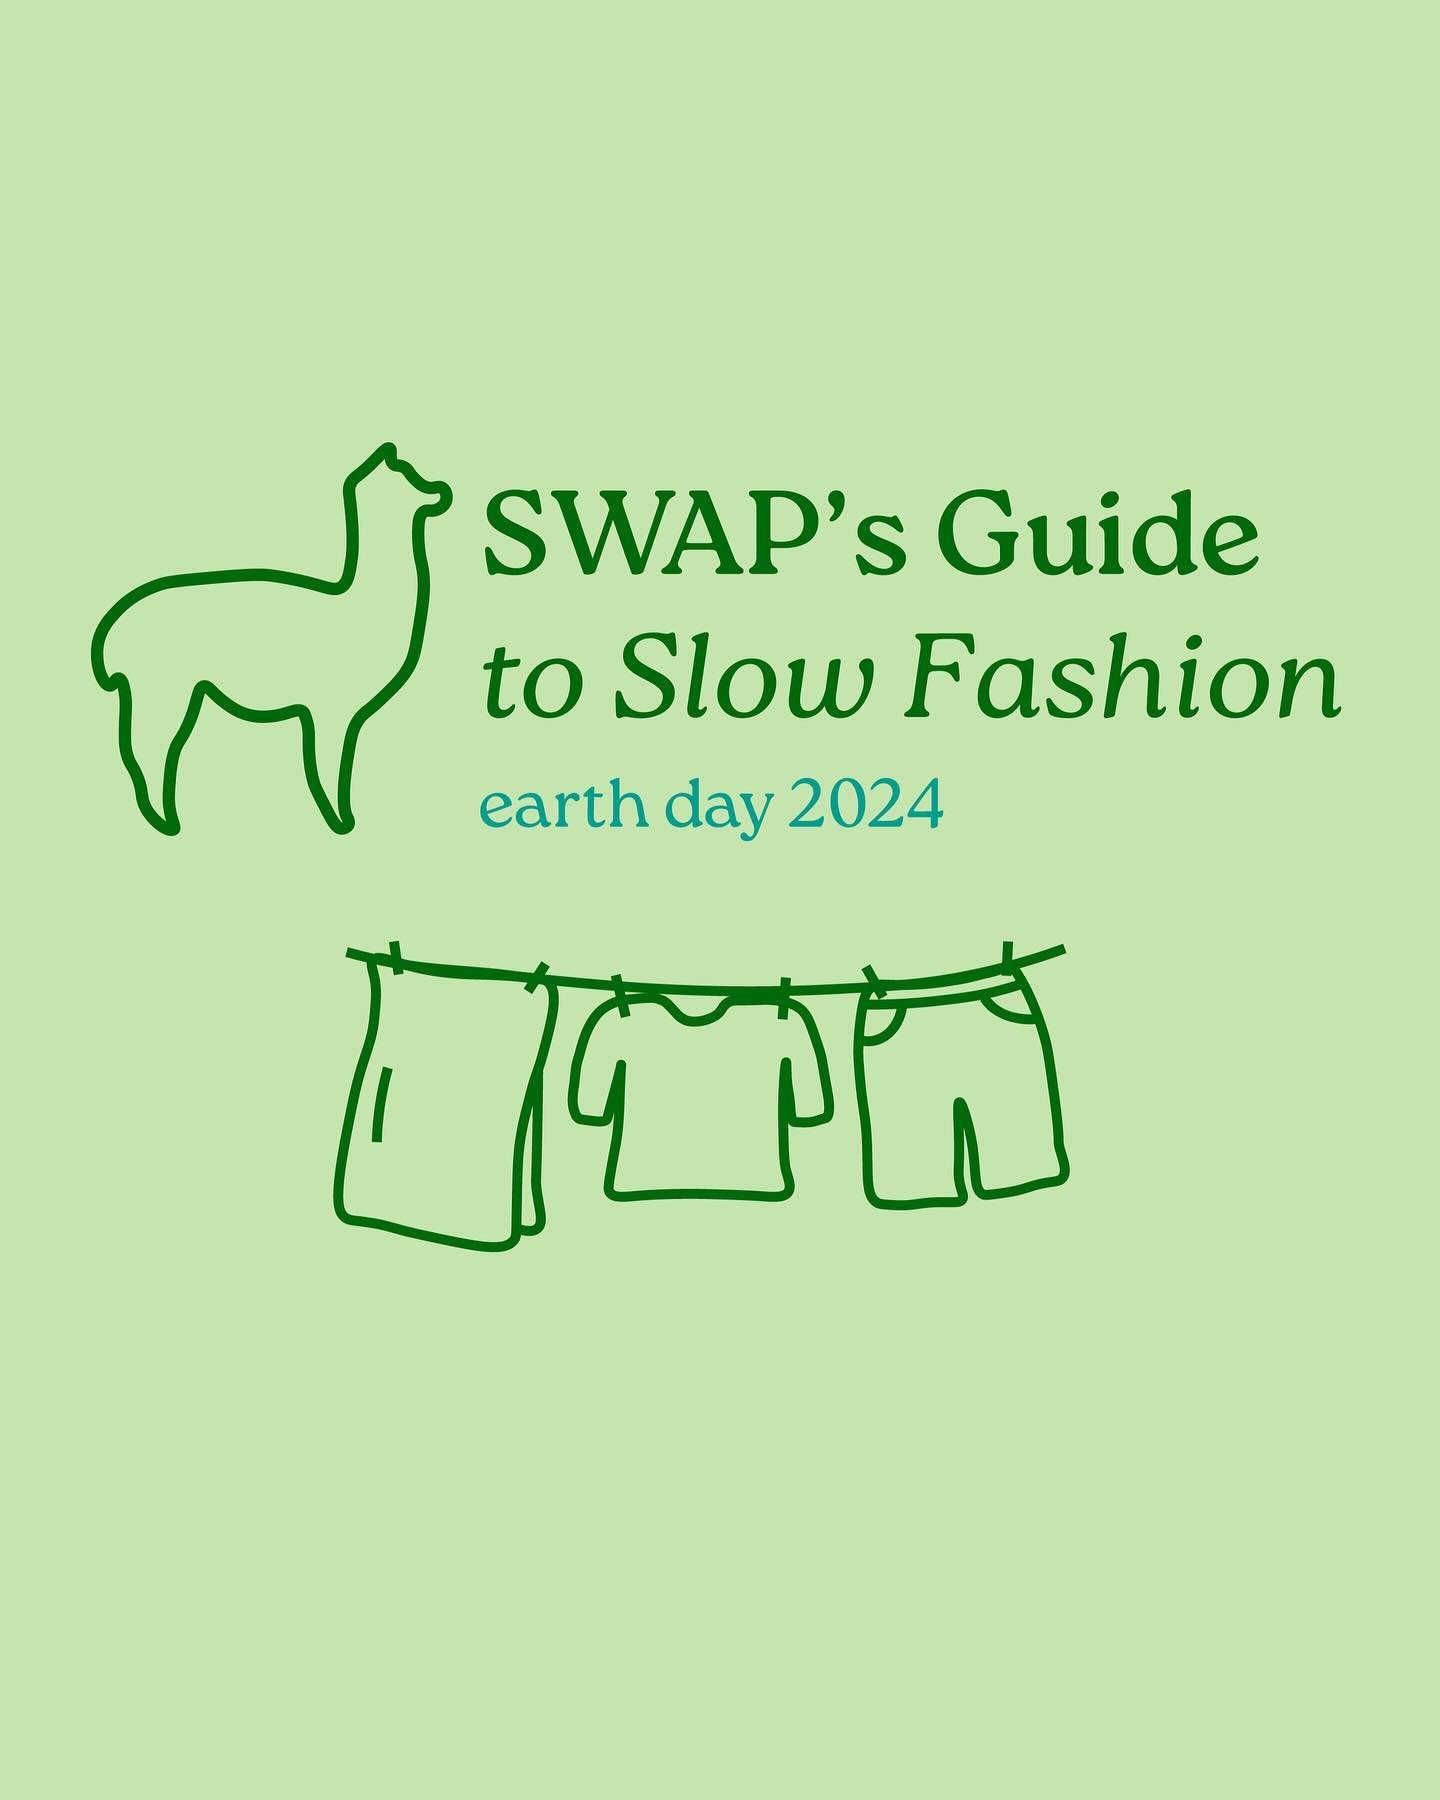 in honor of earth day, we have compiled our very own &ldquo;guide to slow fashion&rdquo; for your use!!🤩 scroll to the end to see tips from swap members and the washu community👚♻️